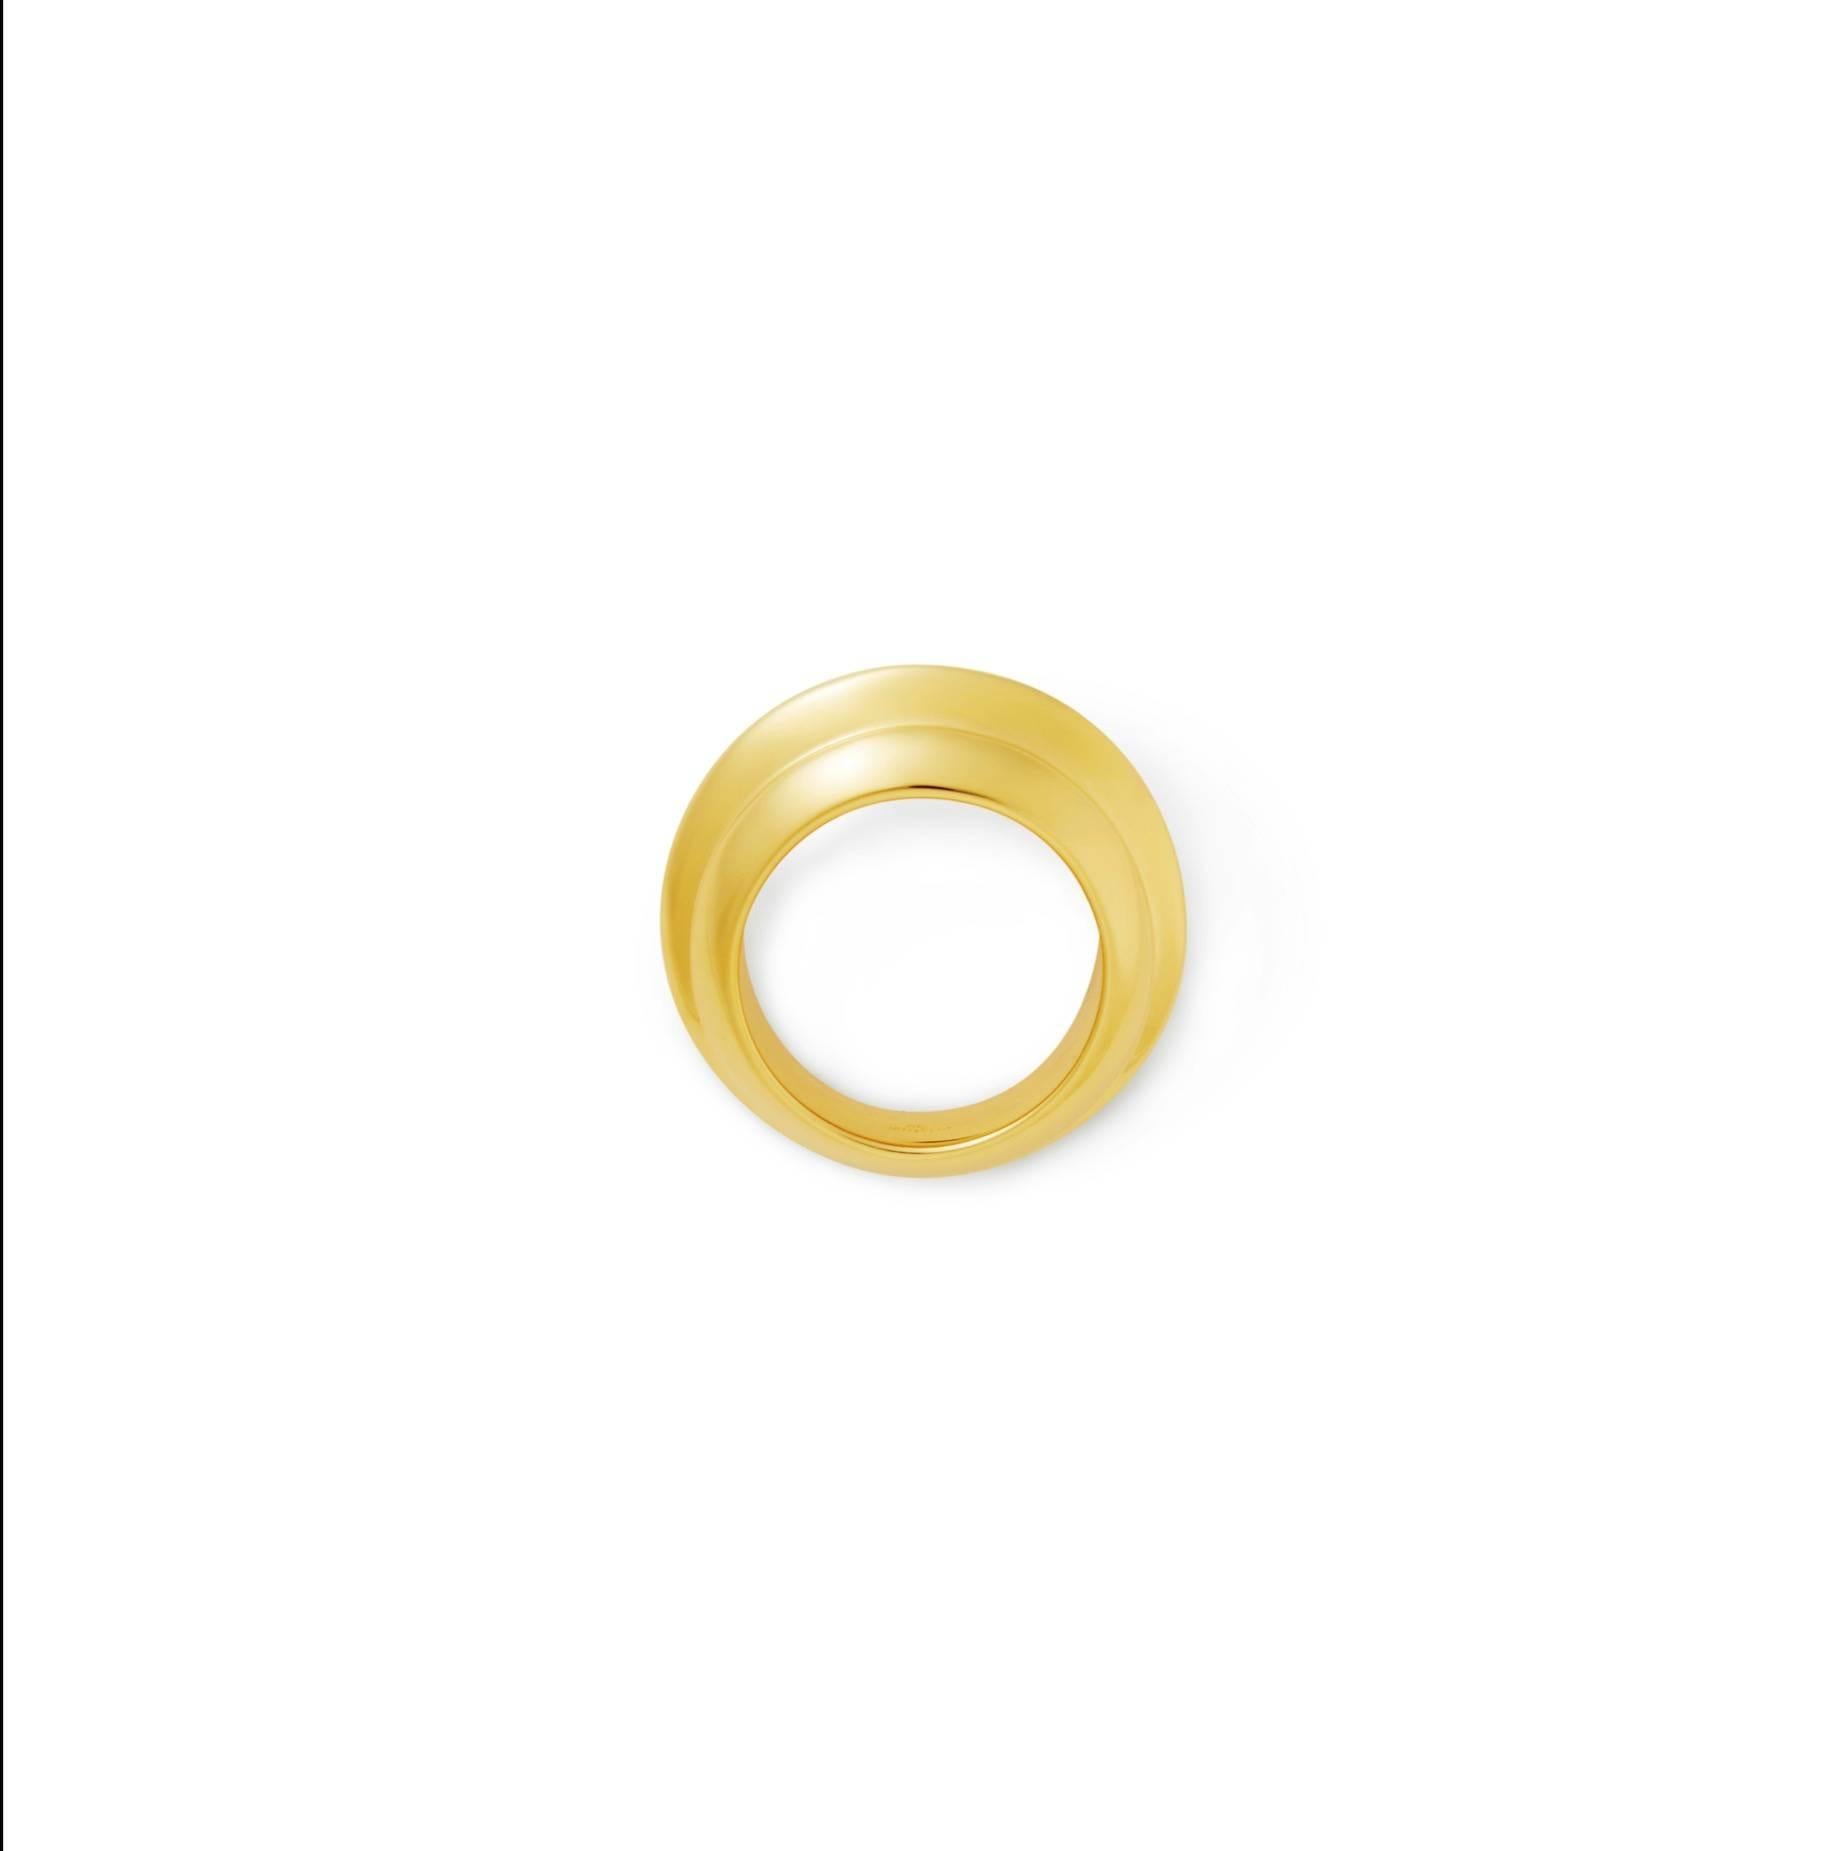 Sleek and modern design our gold gravity ring is something special. Its easy to wear, comfortable and made from high quality gold. The quality is apparent on this beautiful piece of jewelry. Can be worn daily. Several sizes available.